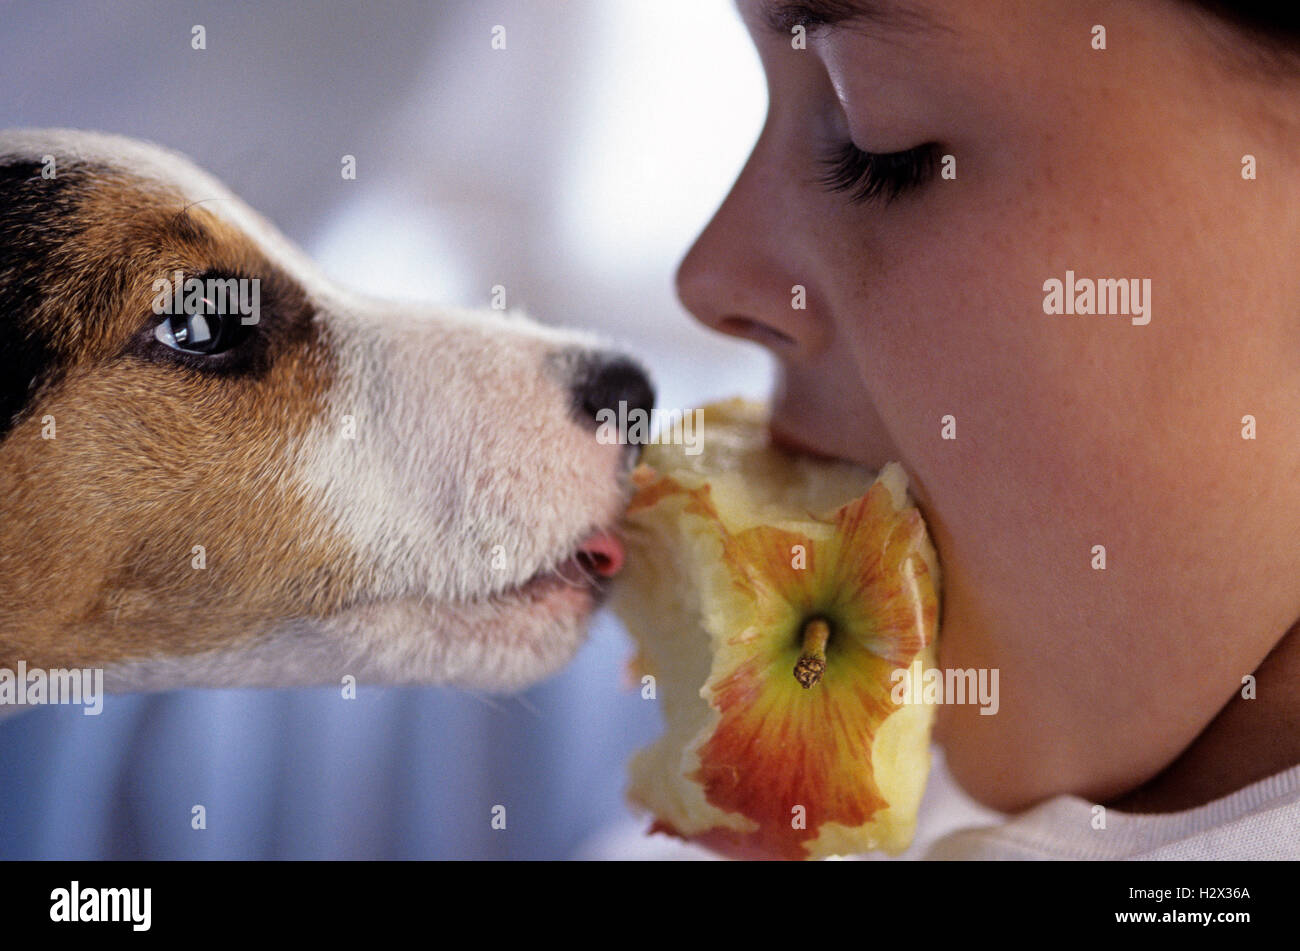 Young girl with her puppy ( Jack Russell Terrier) intensely looking at each other and eating an apple together Stock Photo